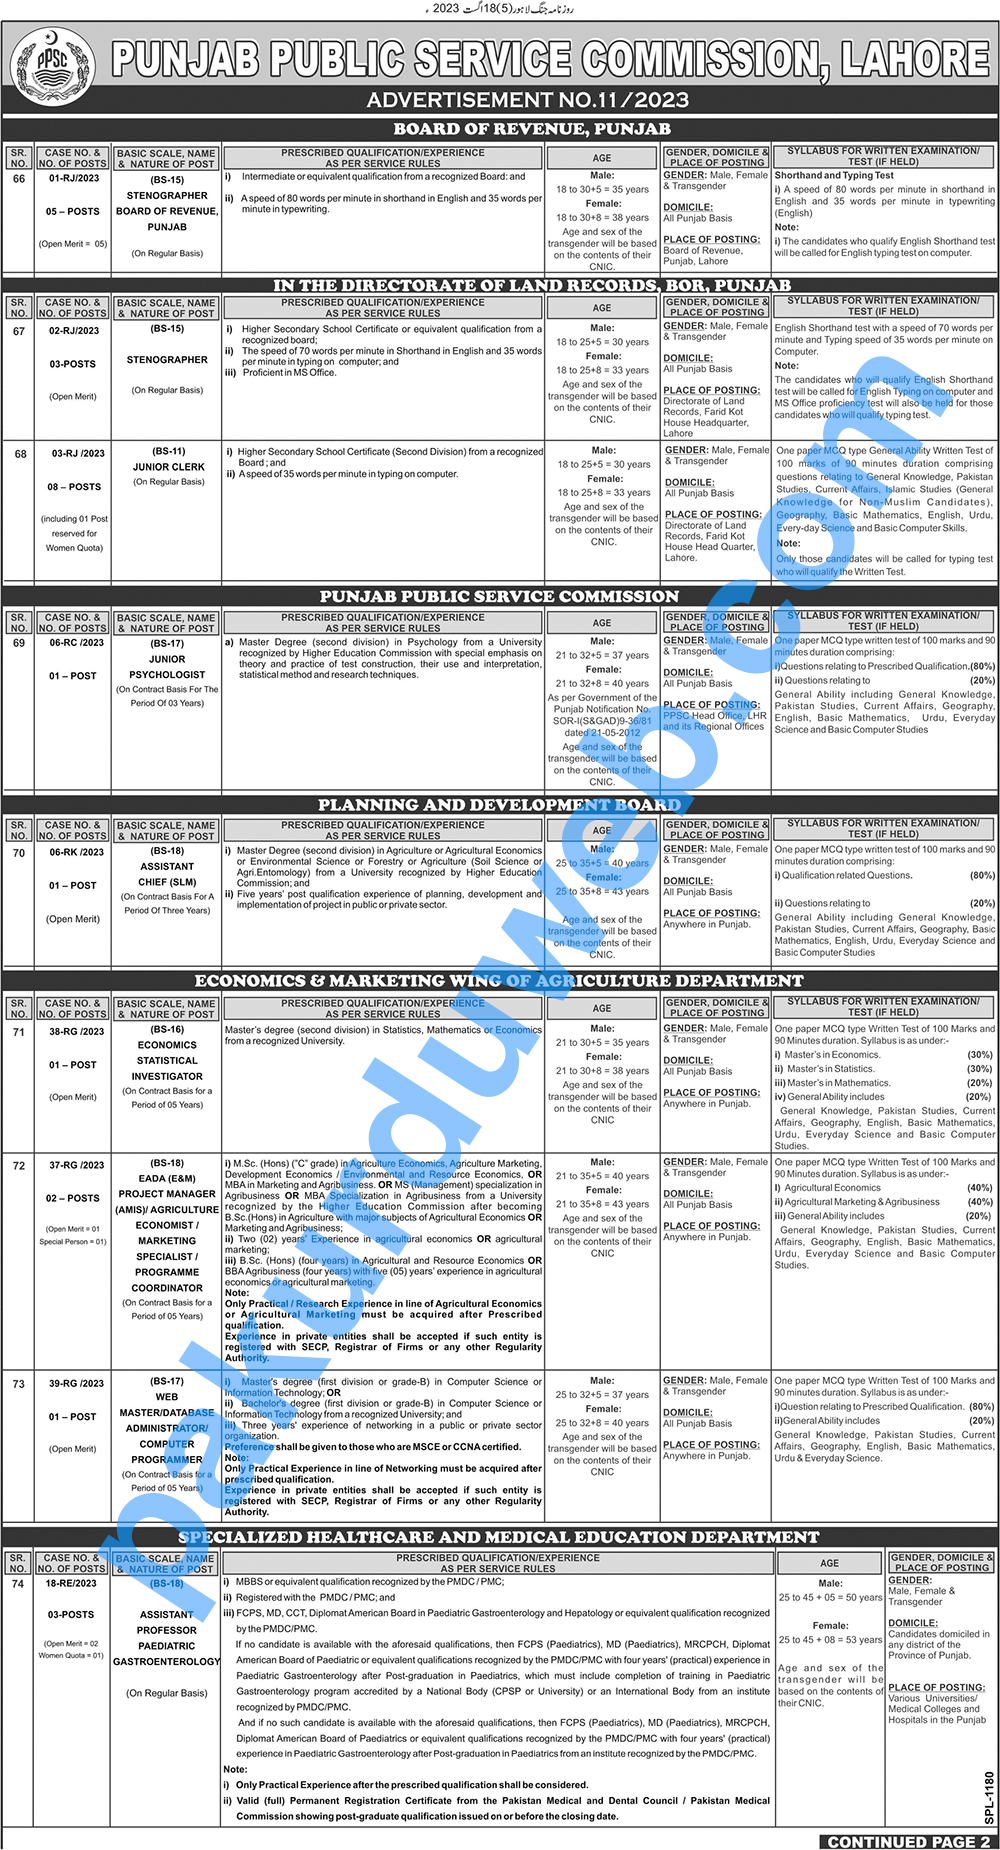 🌟 PPSC Jobs, Opportunities with Punjab Public Service Commission (PPSC) - 2023 🌟